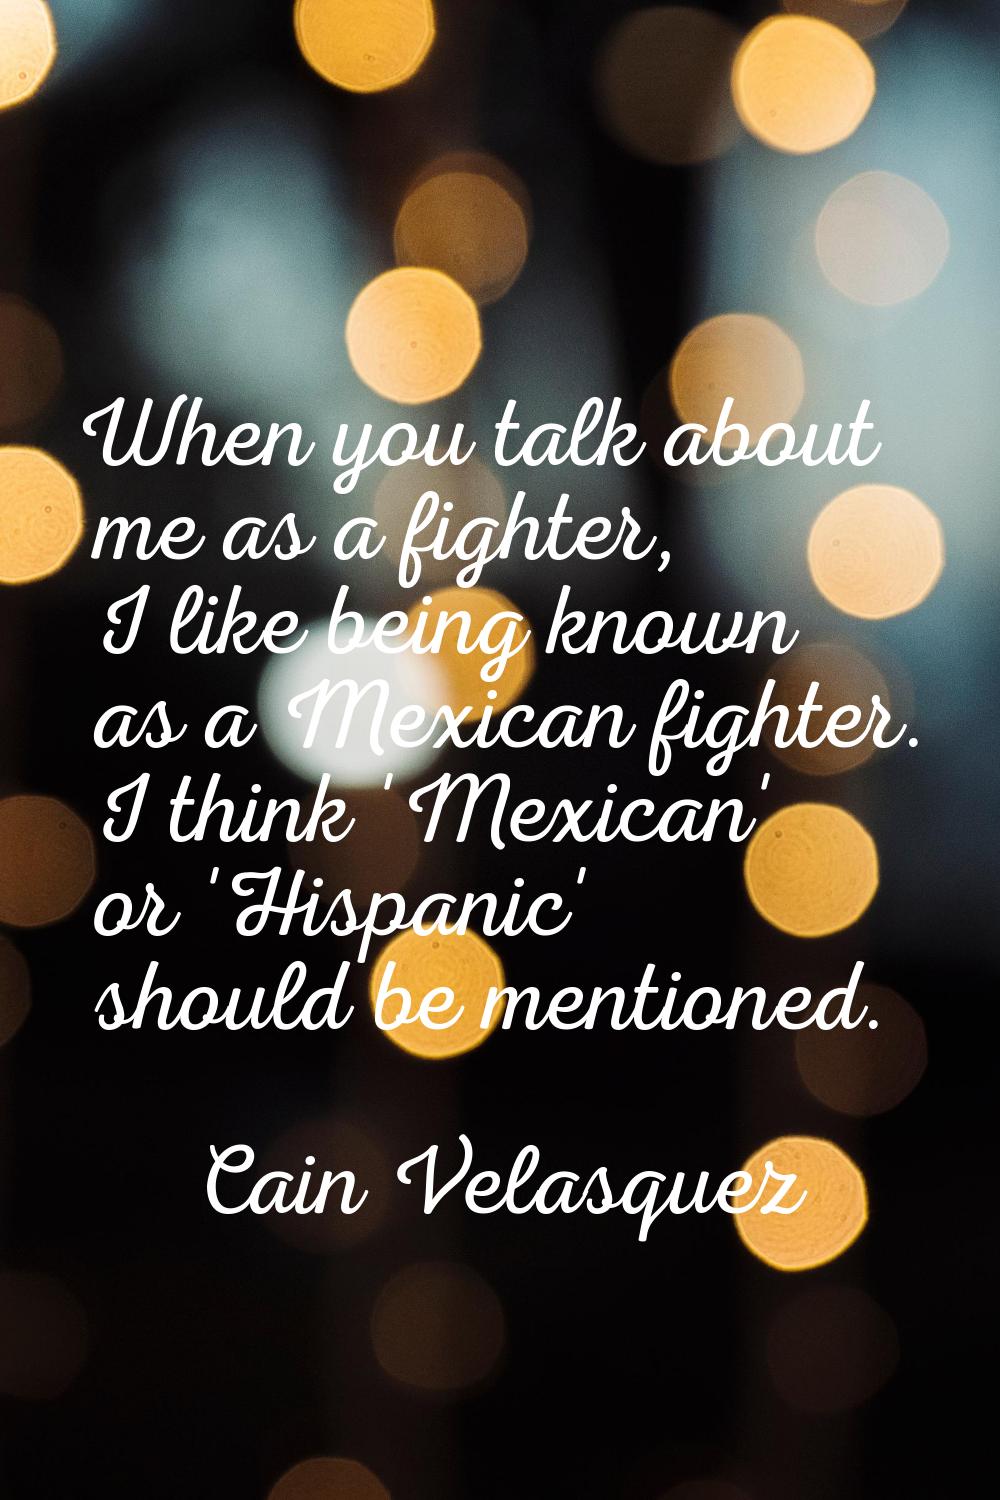 When you talk about me as a fighter, I like being known as a Mexican fighter. I think 'Mexican' or 